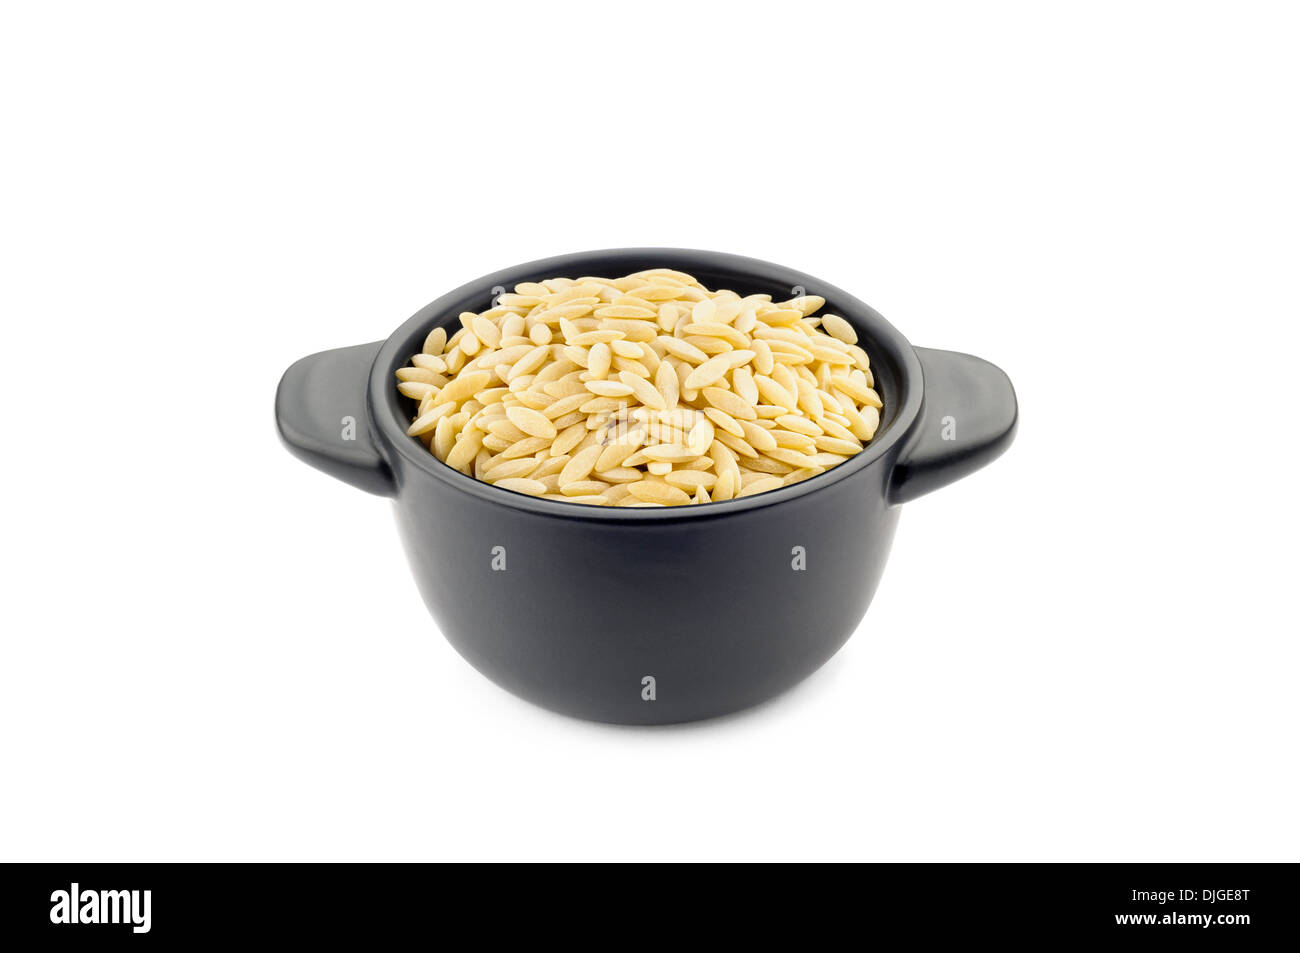 Pasta 'orzo' type in a little black ceramic dish, good for soup and minestrone Stock Photo